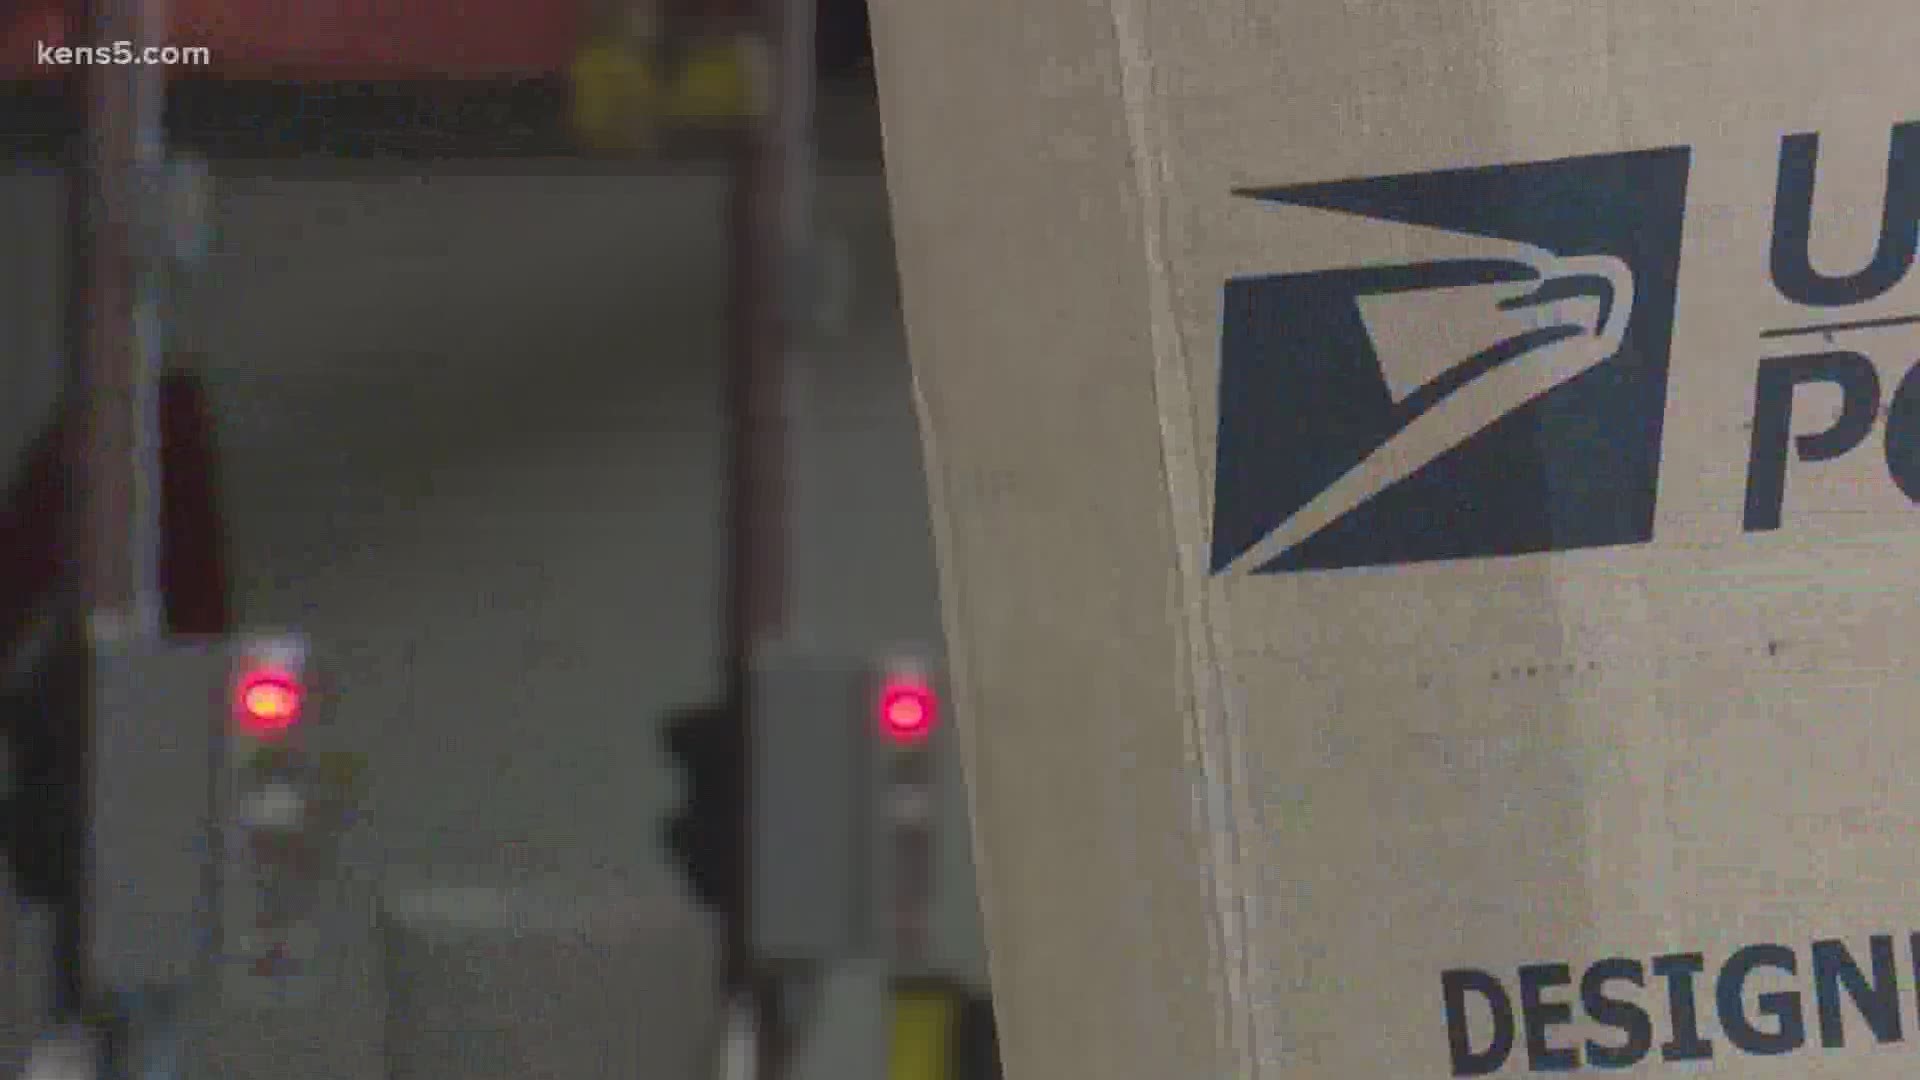 Amid nationwide delays under the new Postmaster General, the USPS in San Antonio just kicked four machines each capable of sorting 35,000 letters per hour.